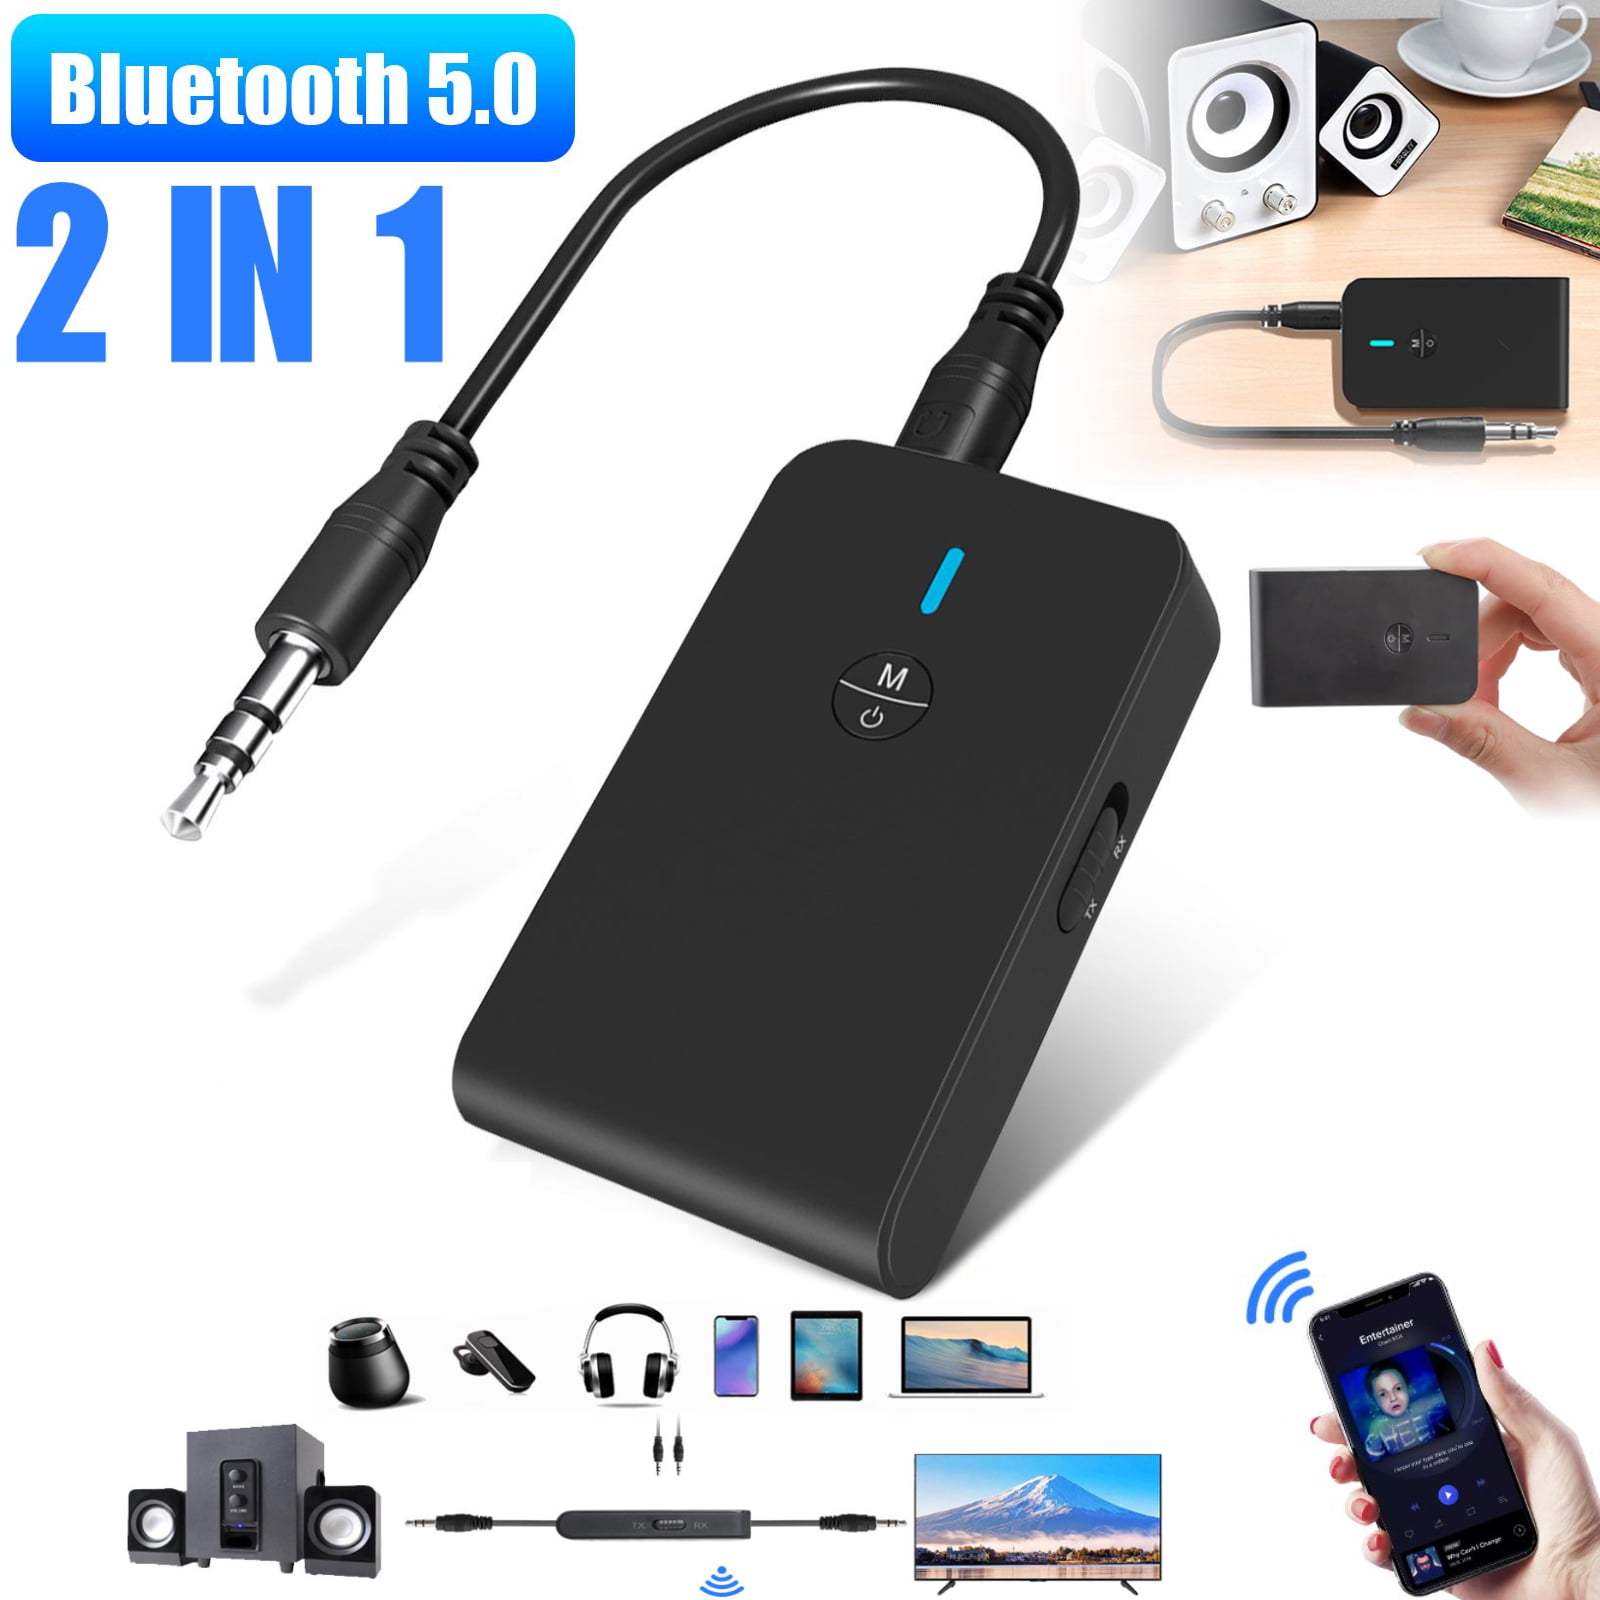 2 in 1 Bluetooth 4.2 Transmitter&Receiver 3.5mm Wireless Stereo Audio Adapter A* 